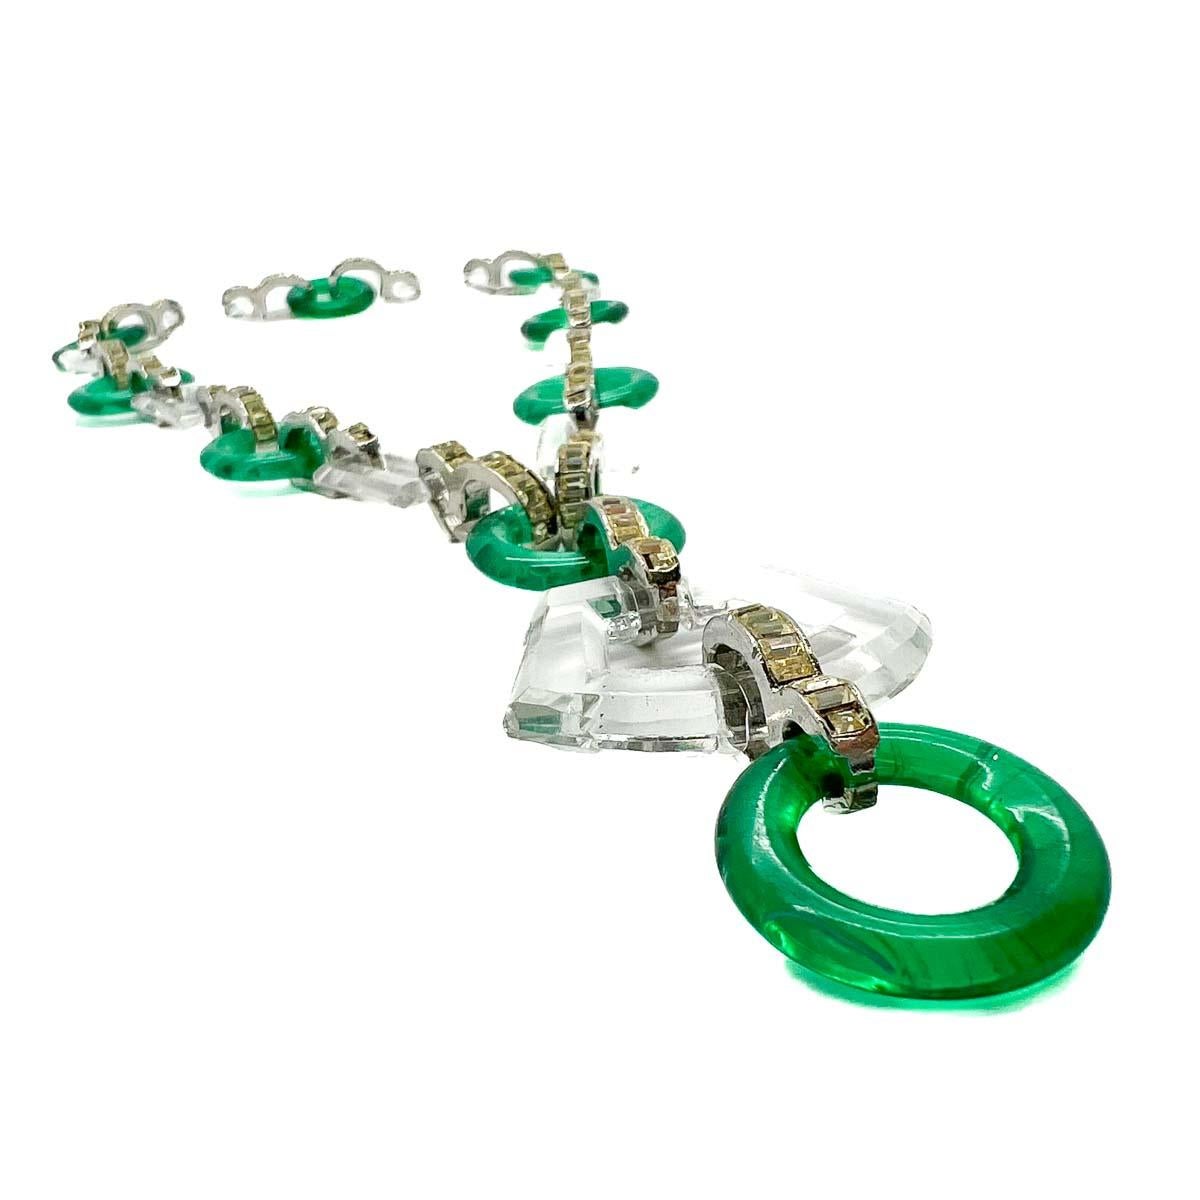 A Vintage Kenneth Lane Art Deco Lariat. Originating rom Lane's stand out and highly revered Art Deco collection. Art Deco being one of Lane's favourite periods of design. This eternally elegant necklace cleverly emulates a jade and rock crystal